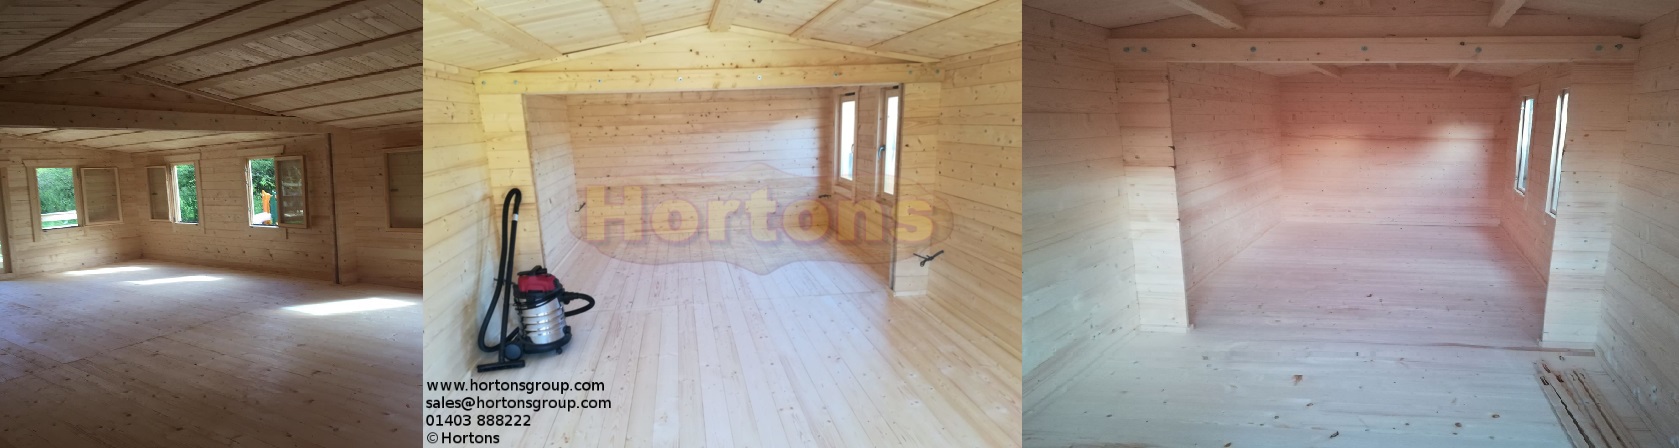 Structural archways in log cabins instead of partitions